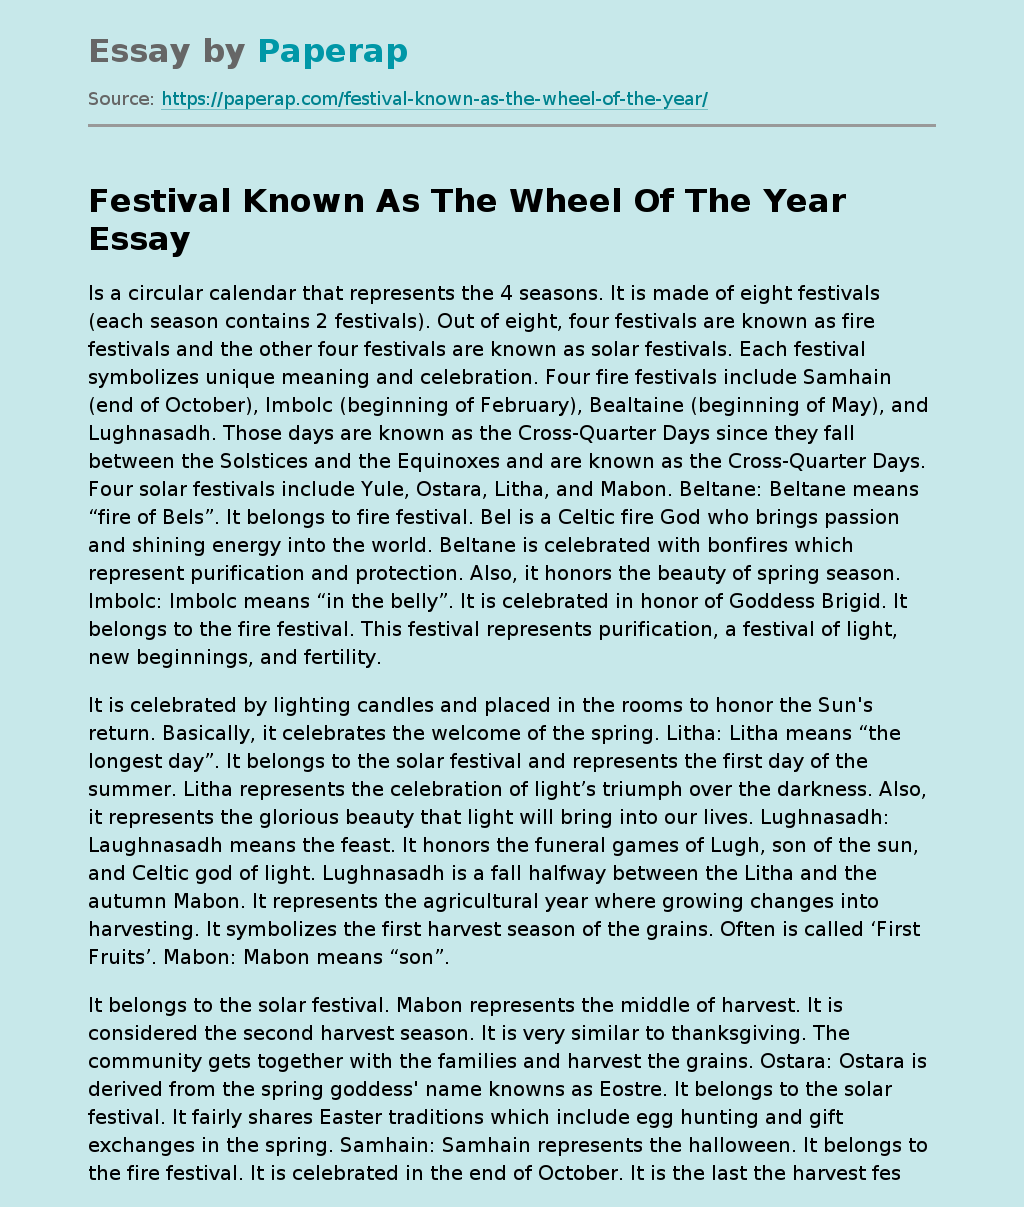 Festival Known As The Wheel Of The Year